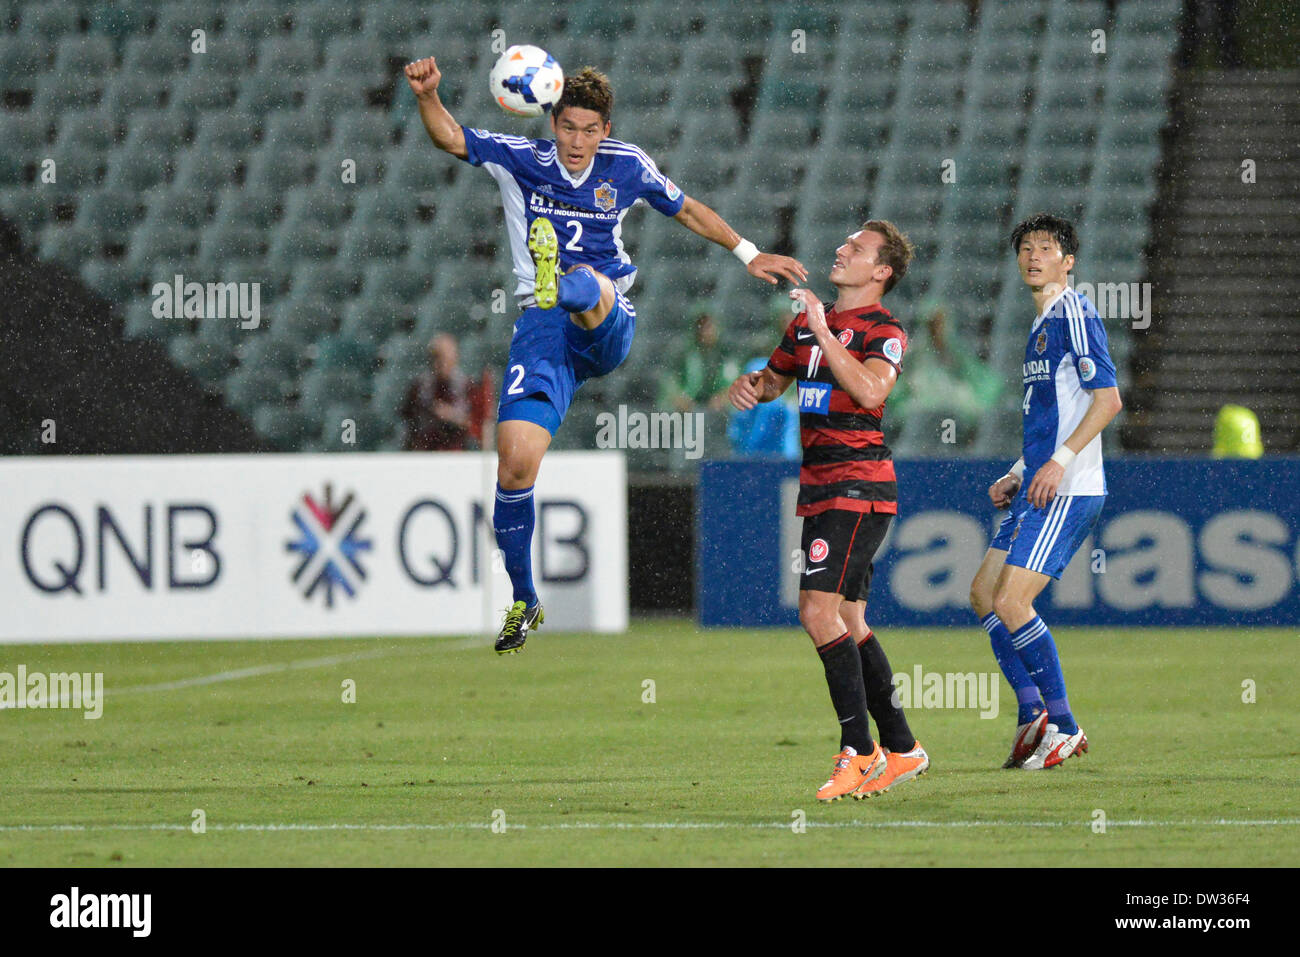 Sydney, Australia. 26th Feb, 2014. Ulsan defender Lee Yong in action during the AFC Champions League game between Western Sydney Wanderers FC and Ulsan Hyundai FC of Korea from the Pirtek Stadium, Parramatta. Ulsan won 3-1. Credit:  Action Plus Sports/Alamy Live News Stock Photo